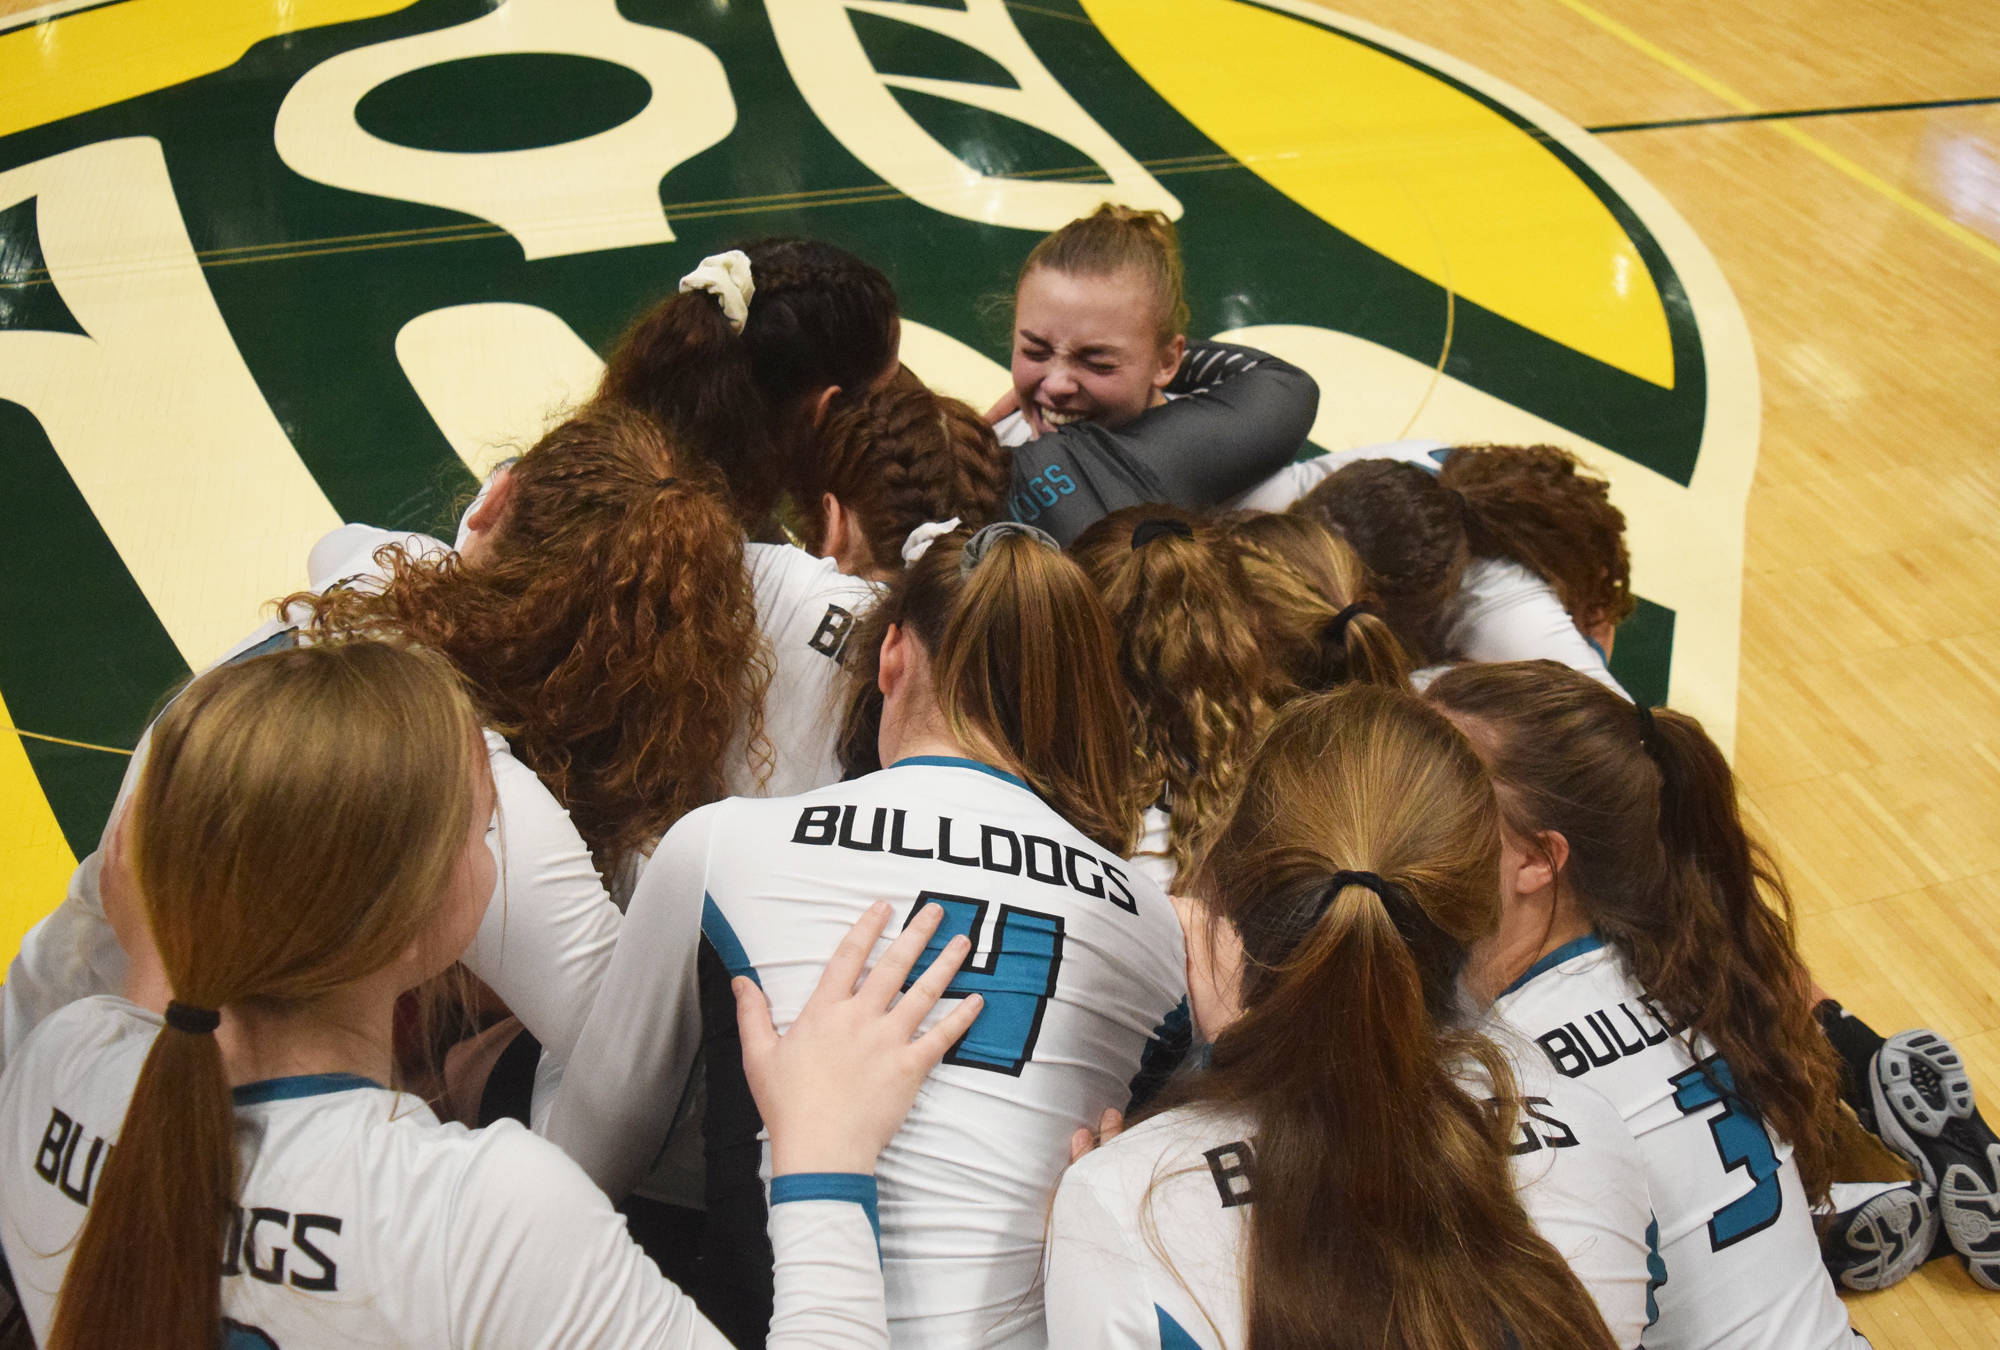 The Nikiski volleyball team celebrates after winning the Class 3A state volleyball championship final Saturday against Valdez at the Alaska Airlines Center. (Photo by Joey Klecka/Peninsula Clarion)